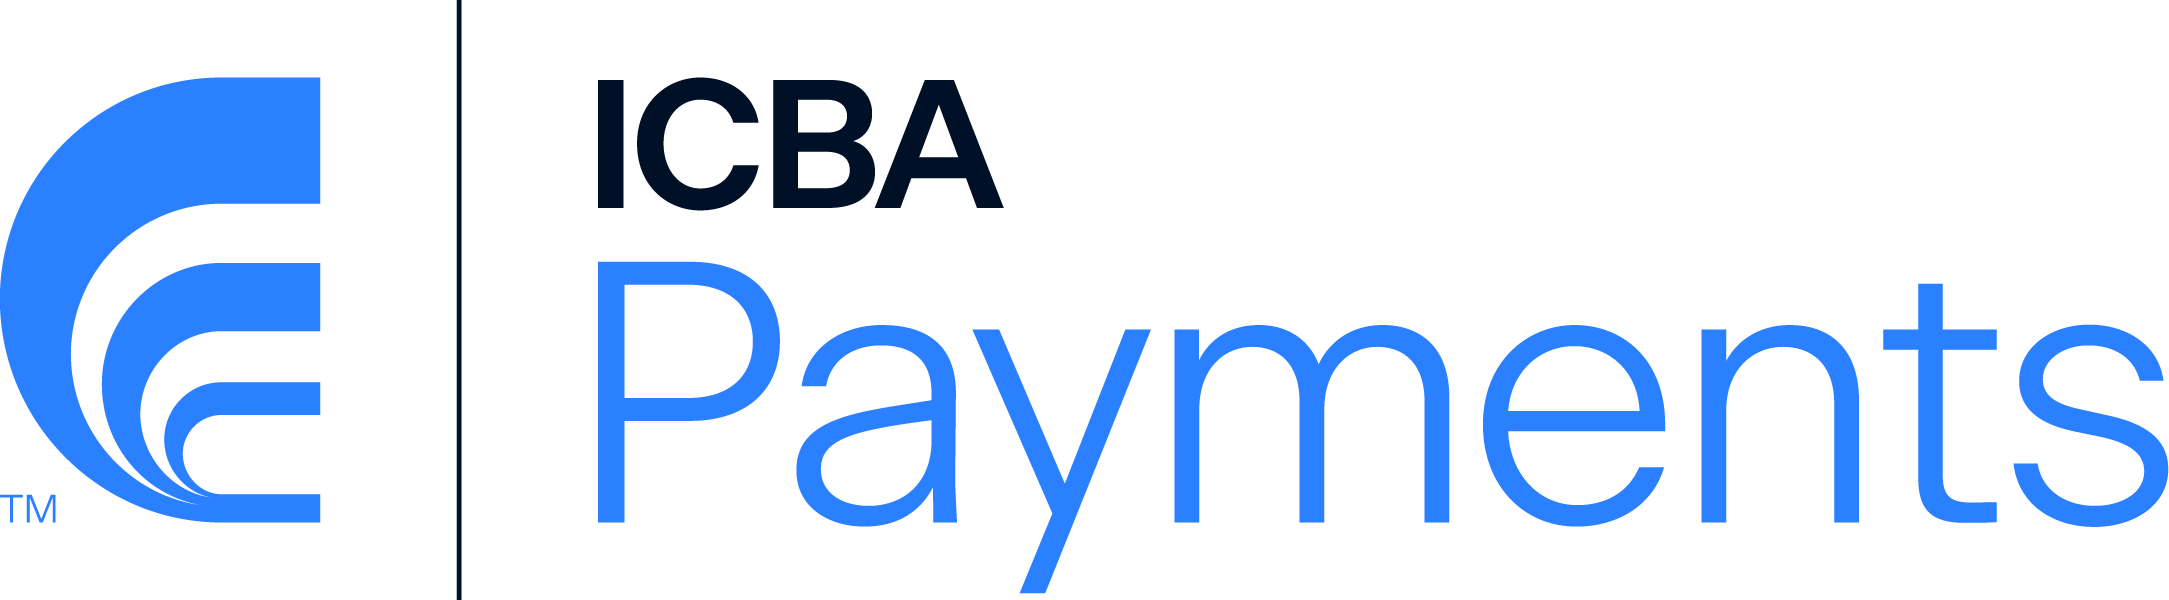 ICBA Payments